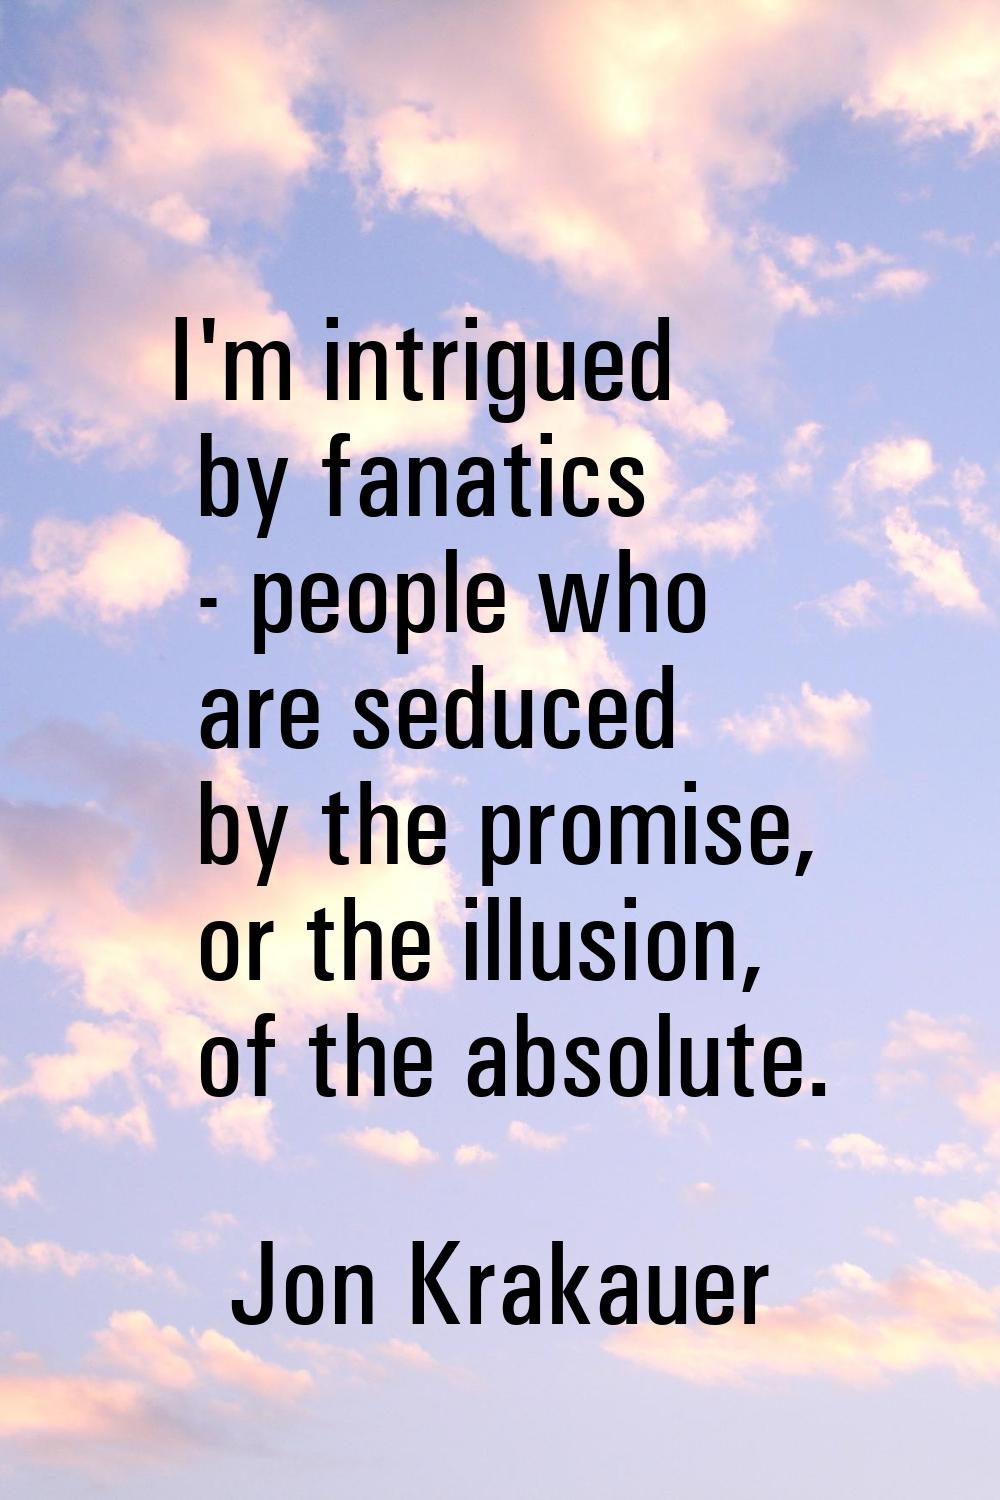 I'm intrigued by fanatics - people who are seduced by the promise, or the illusion, of the absolute